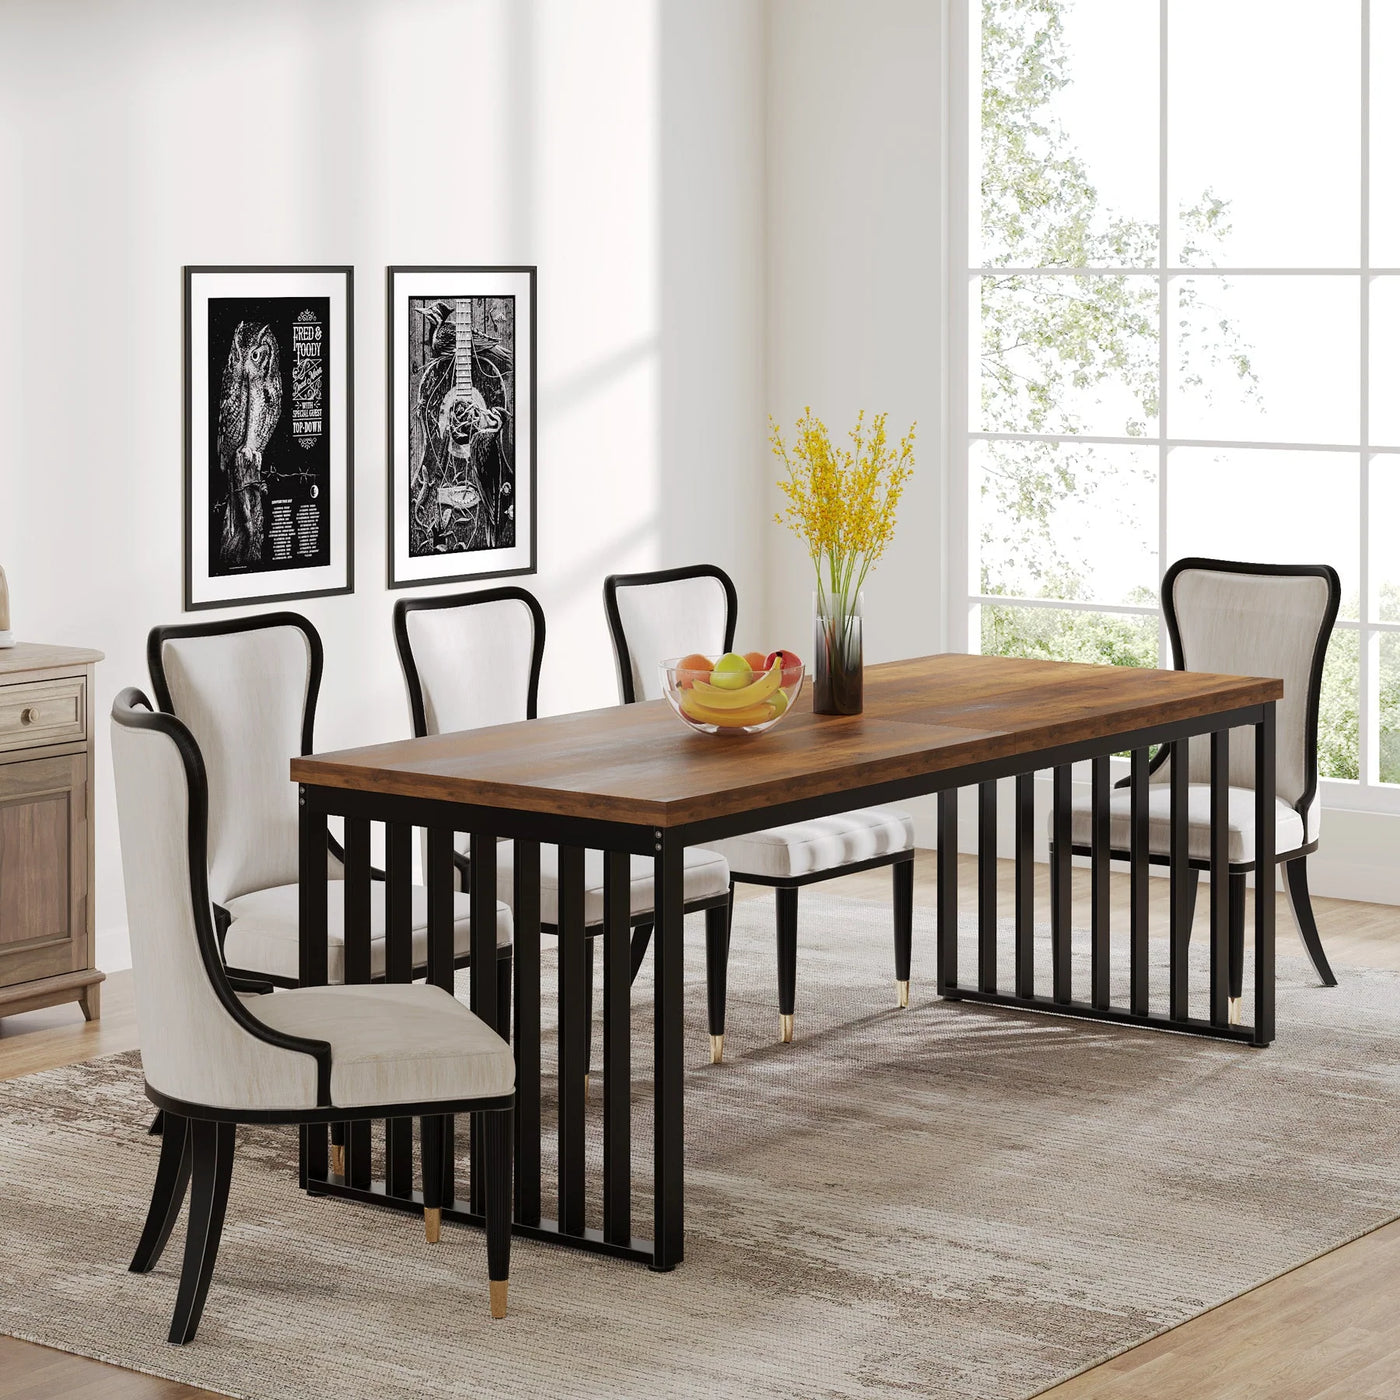 Olivare Modern Dining Table | 78.74 inches Wooden Sturdy Kitchen Table